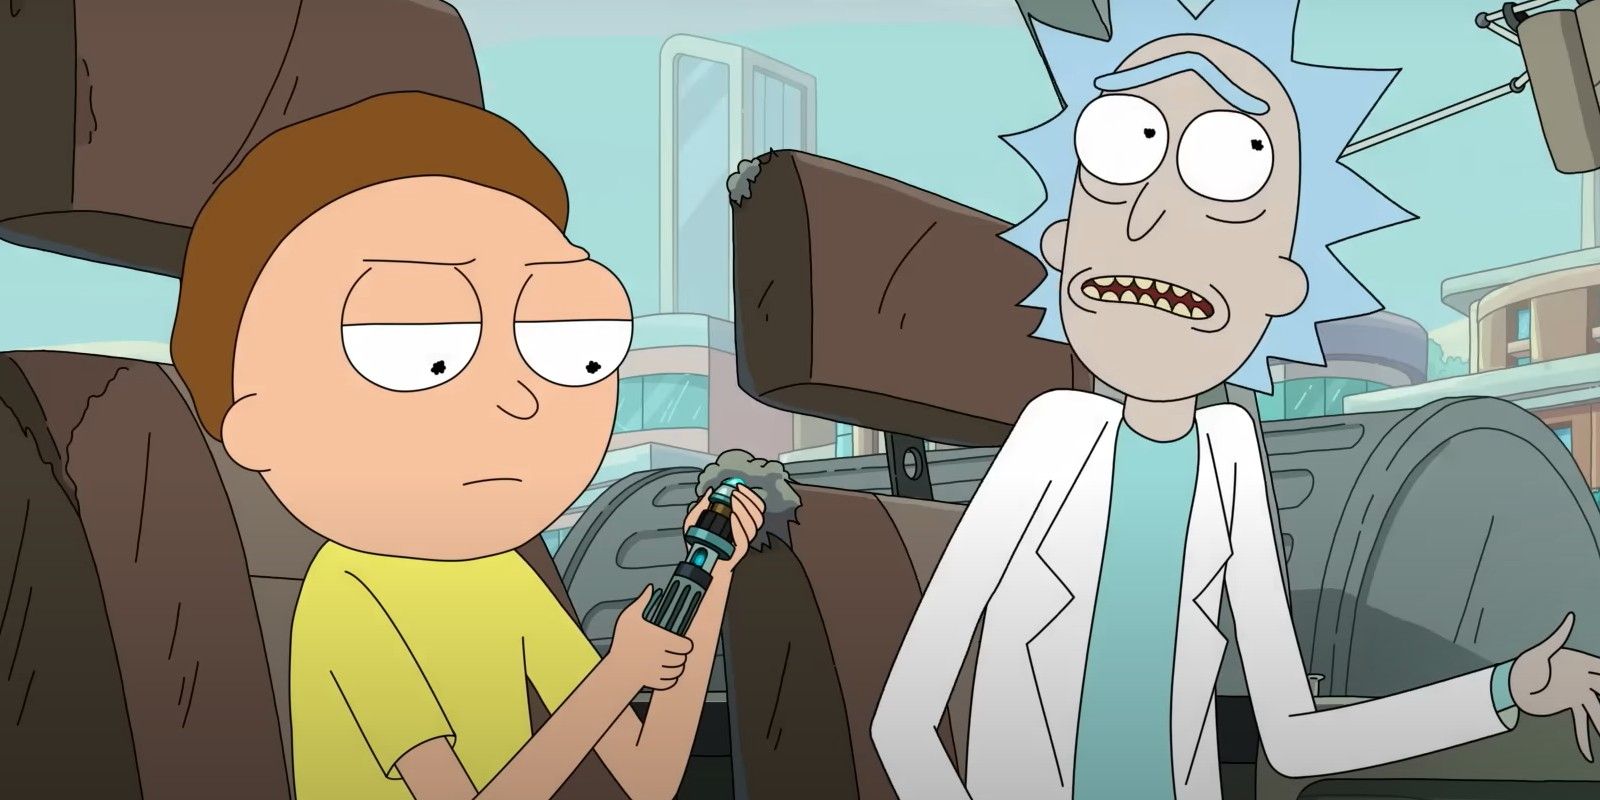 Morty and Rick in Rick and Morty season 7